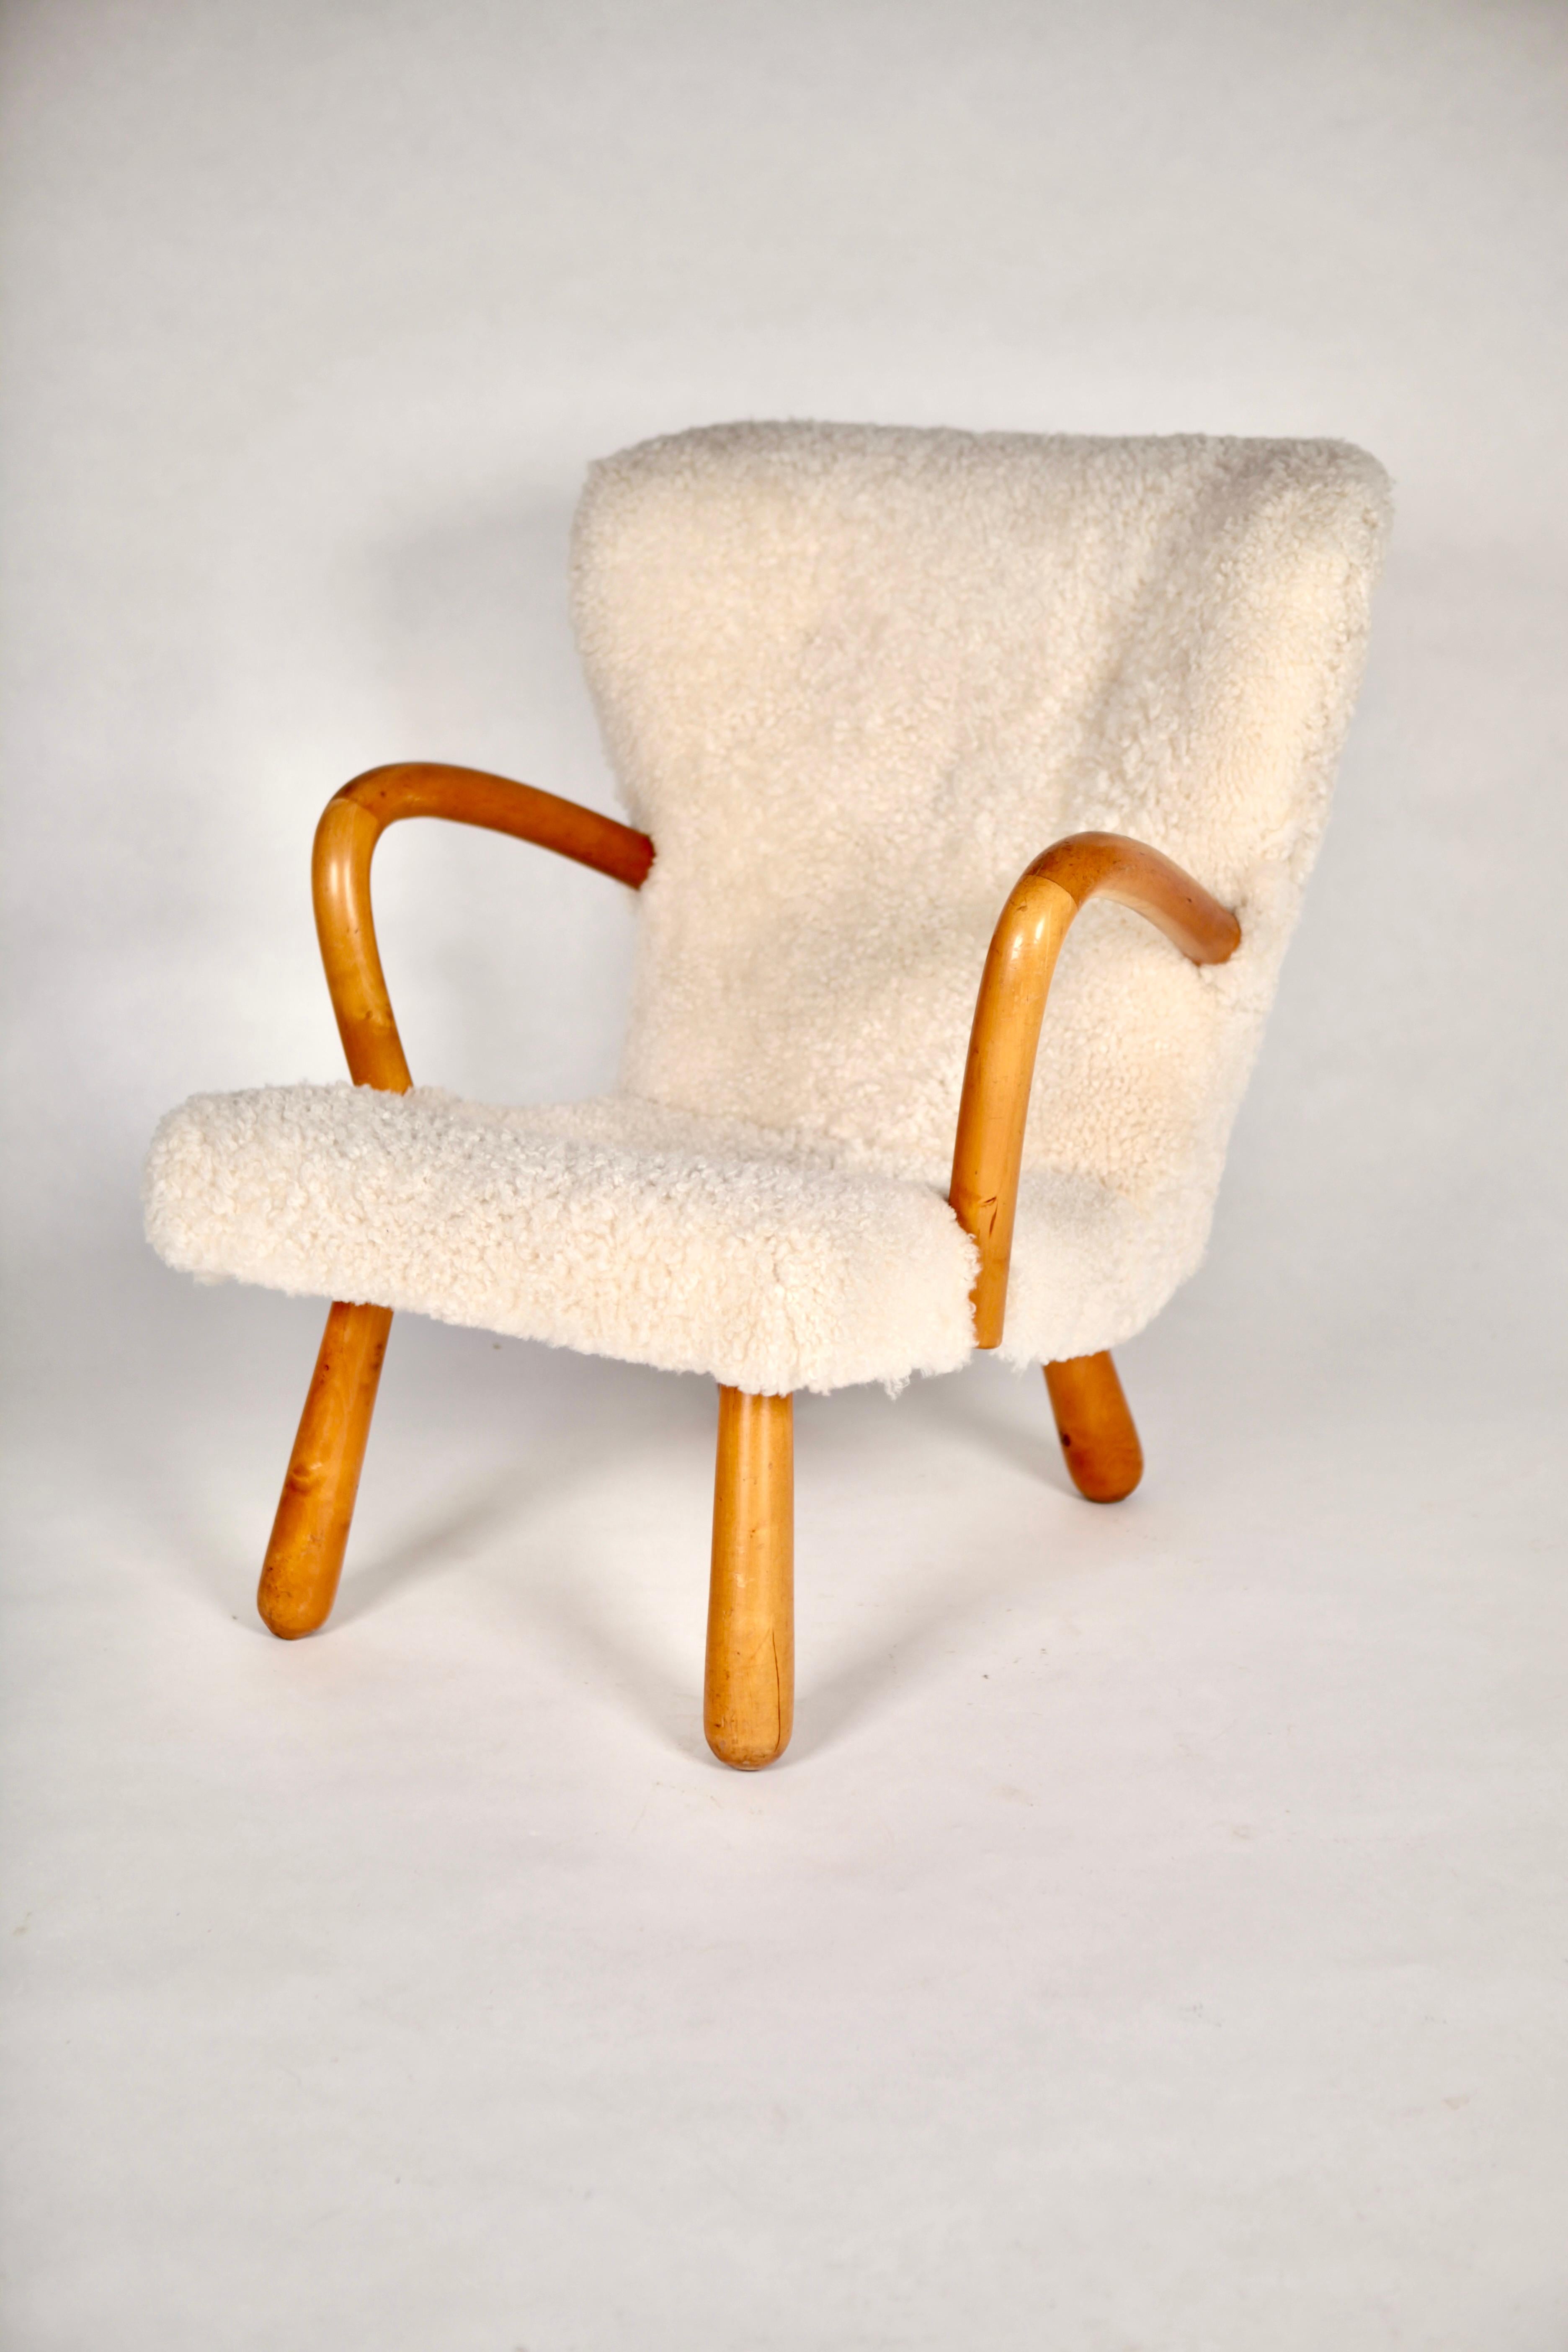 Clam chair, model Åke, cream colored shearling upholstered, legs and armrests in polished birch.
Manufactured by Ikea in Sweden in the 1950s. 
Great collectors item in excellent vintage condition.